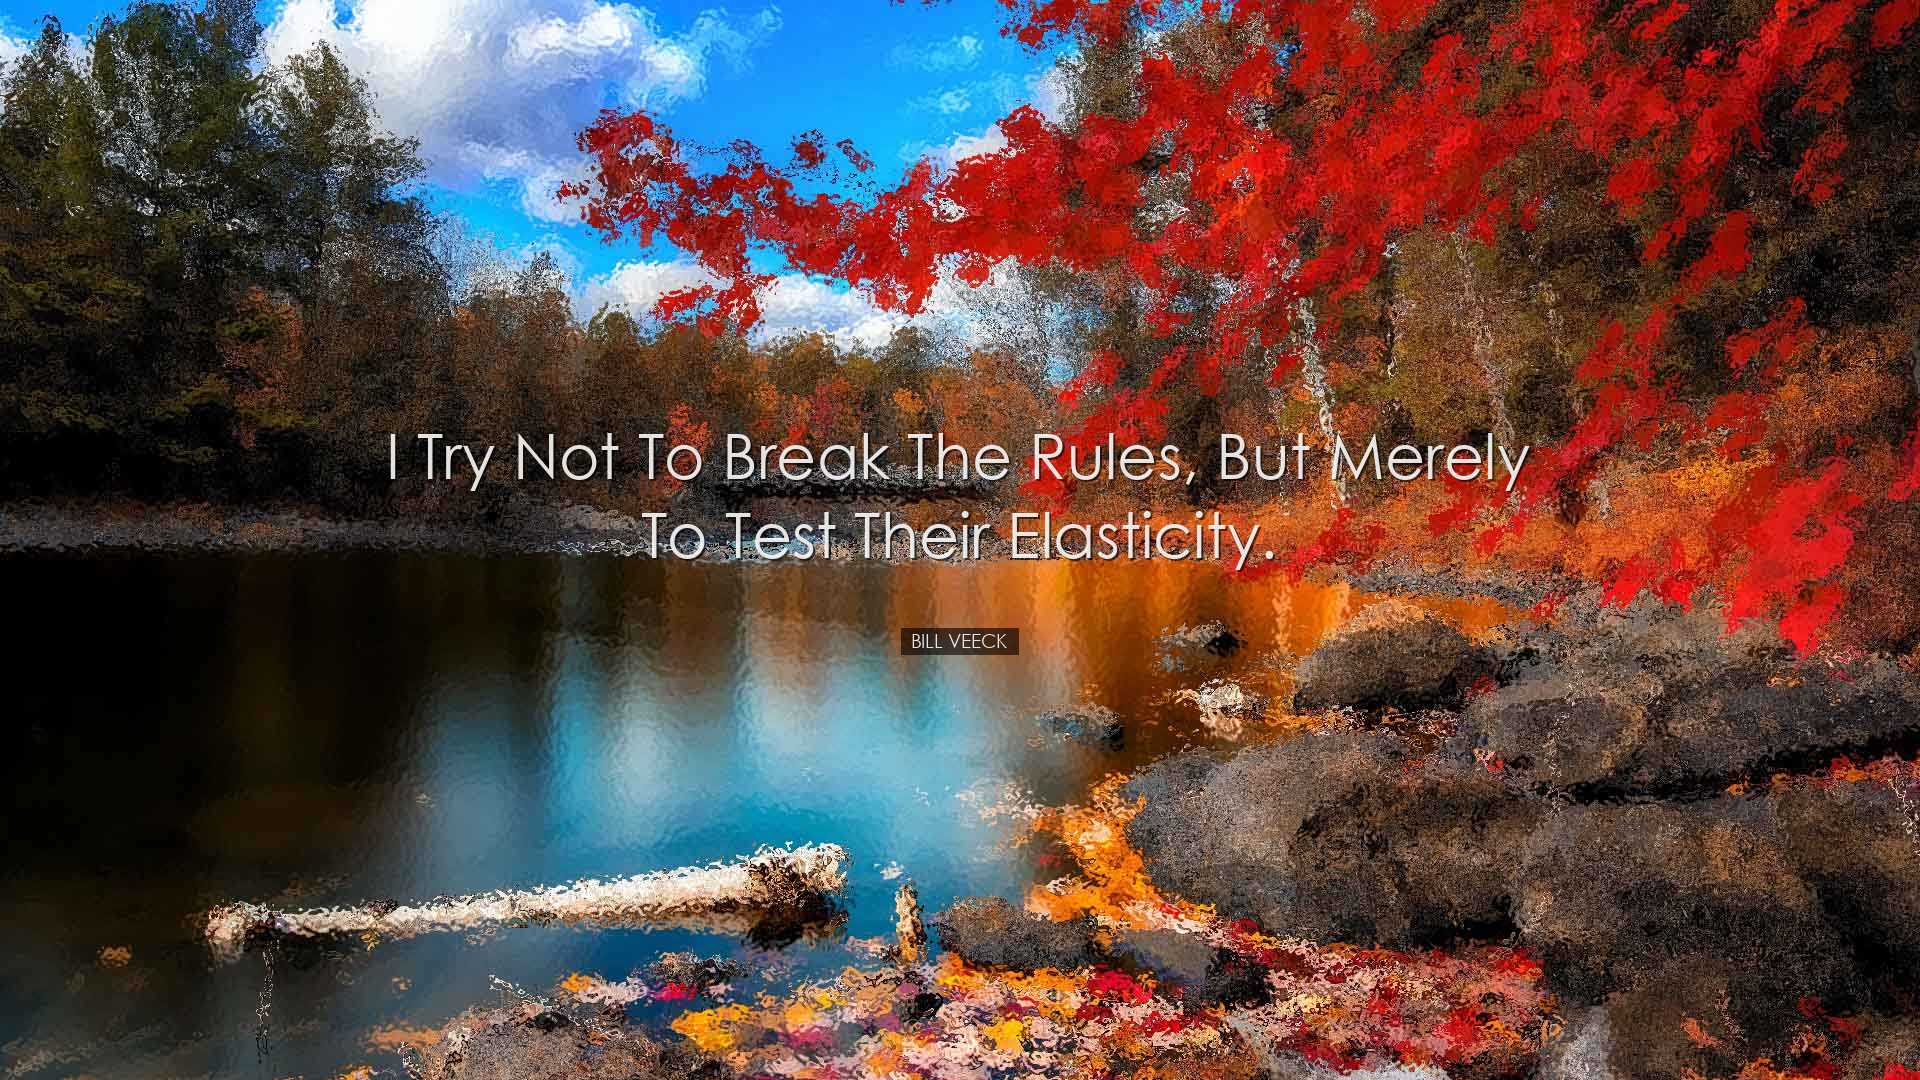 I try not to break the rules, but merely to test their elasticity.